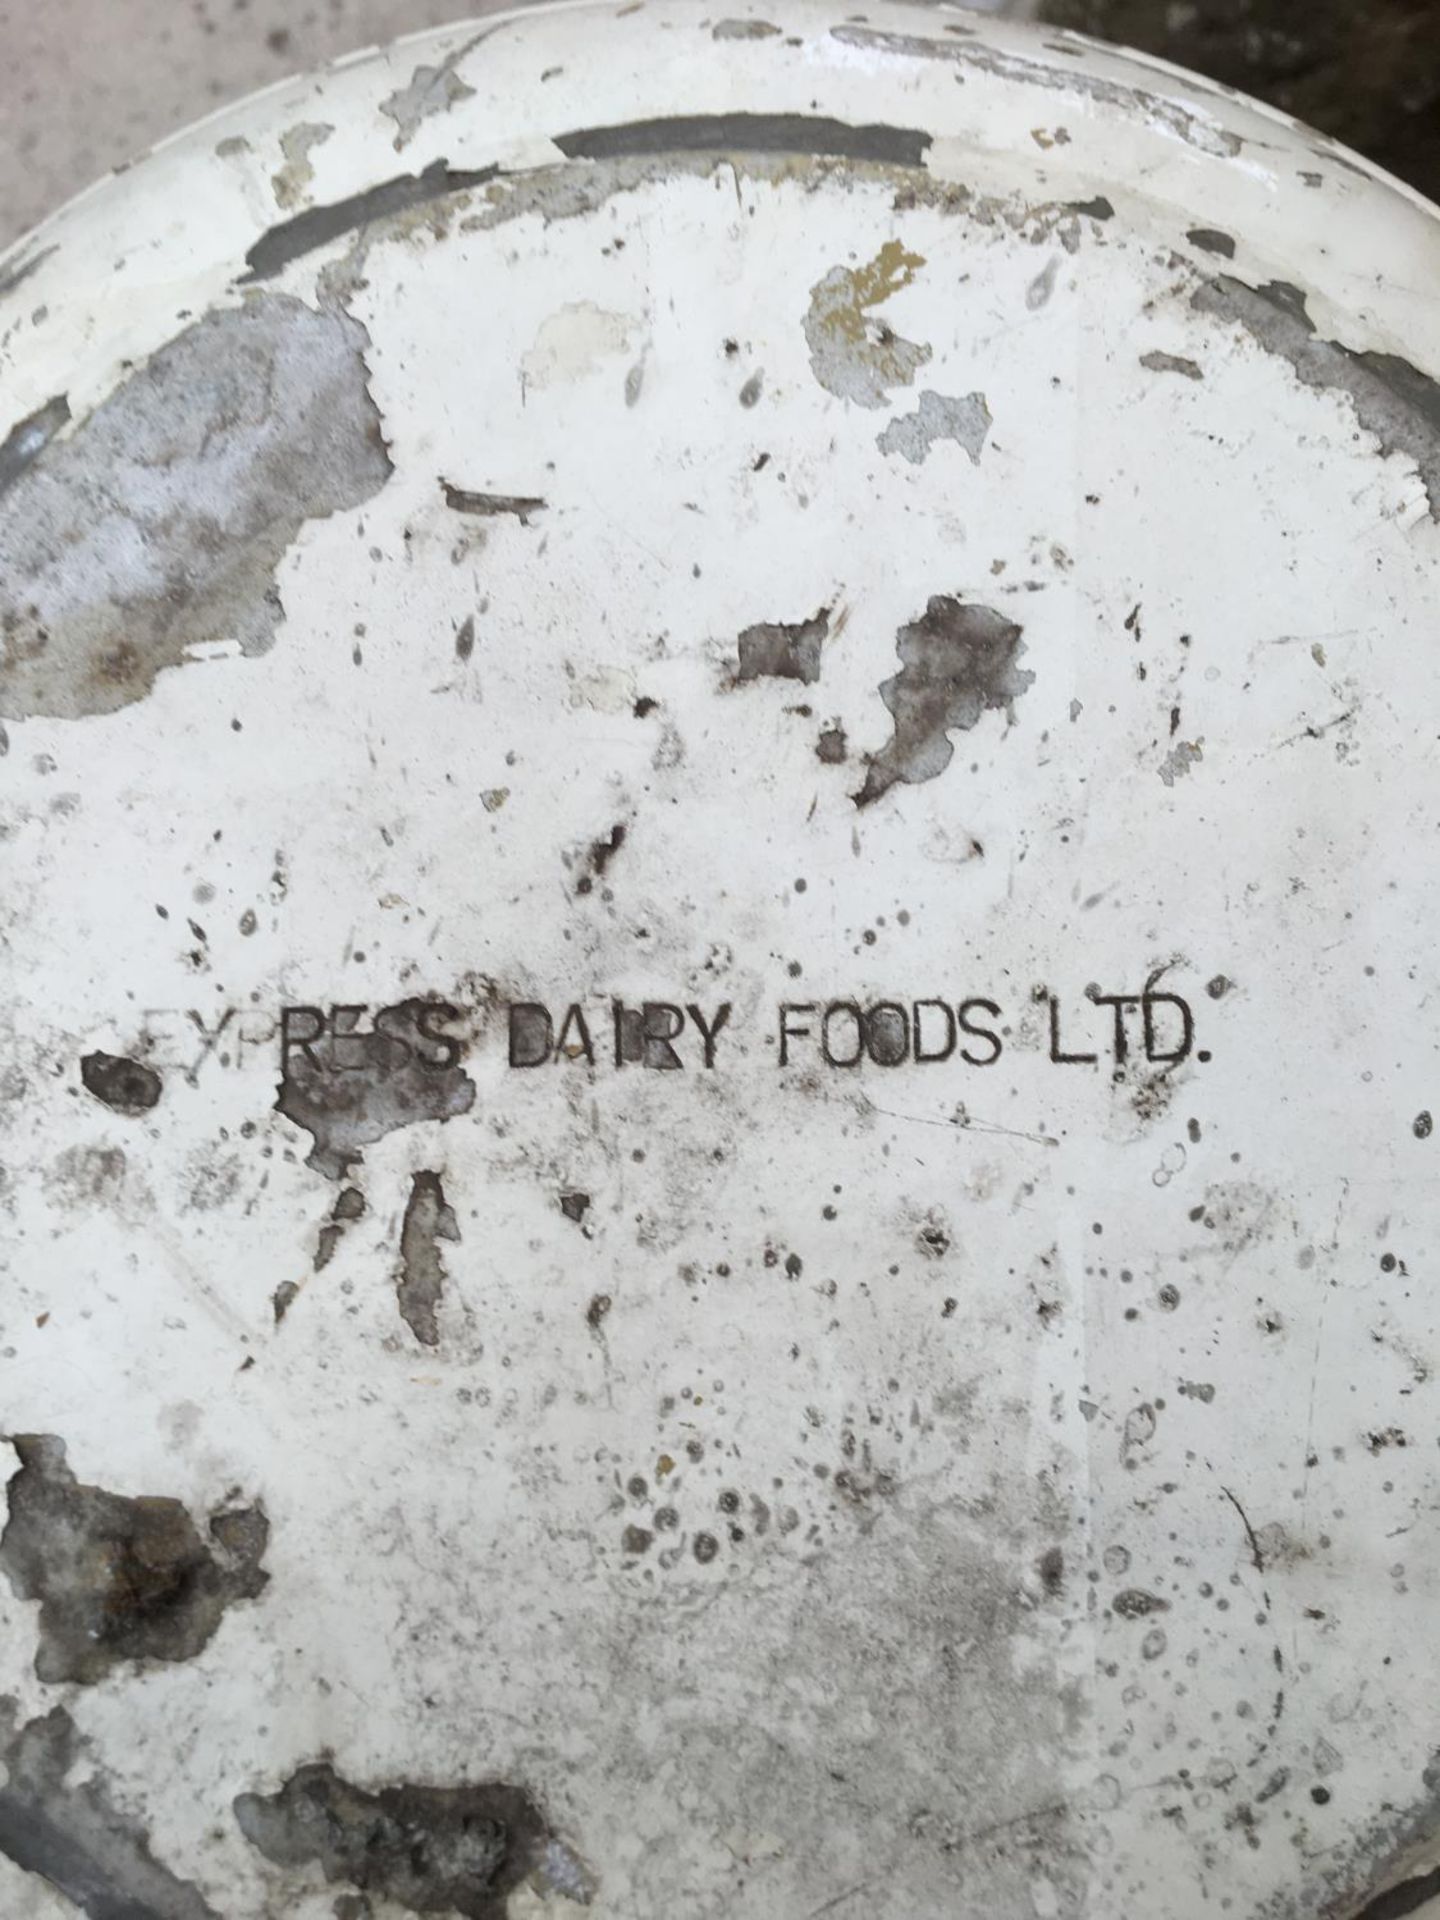 AN EXPRESS DAIRY FOODS LTD MIDLAND COUNTIES MILK CHURN WITH LID - Image 4 of 6